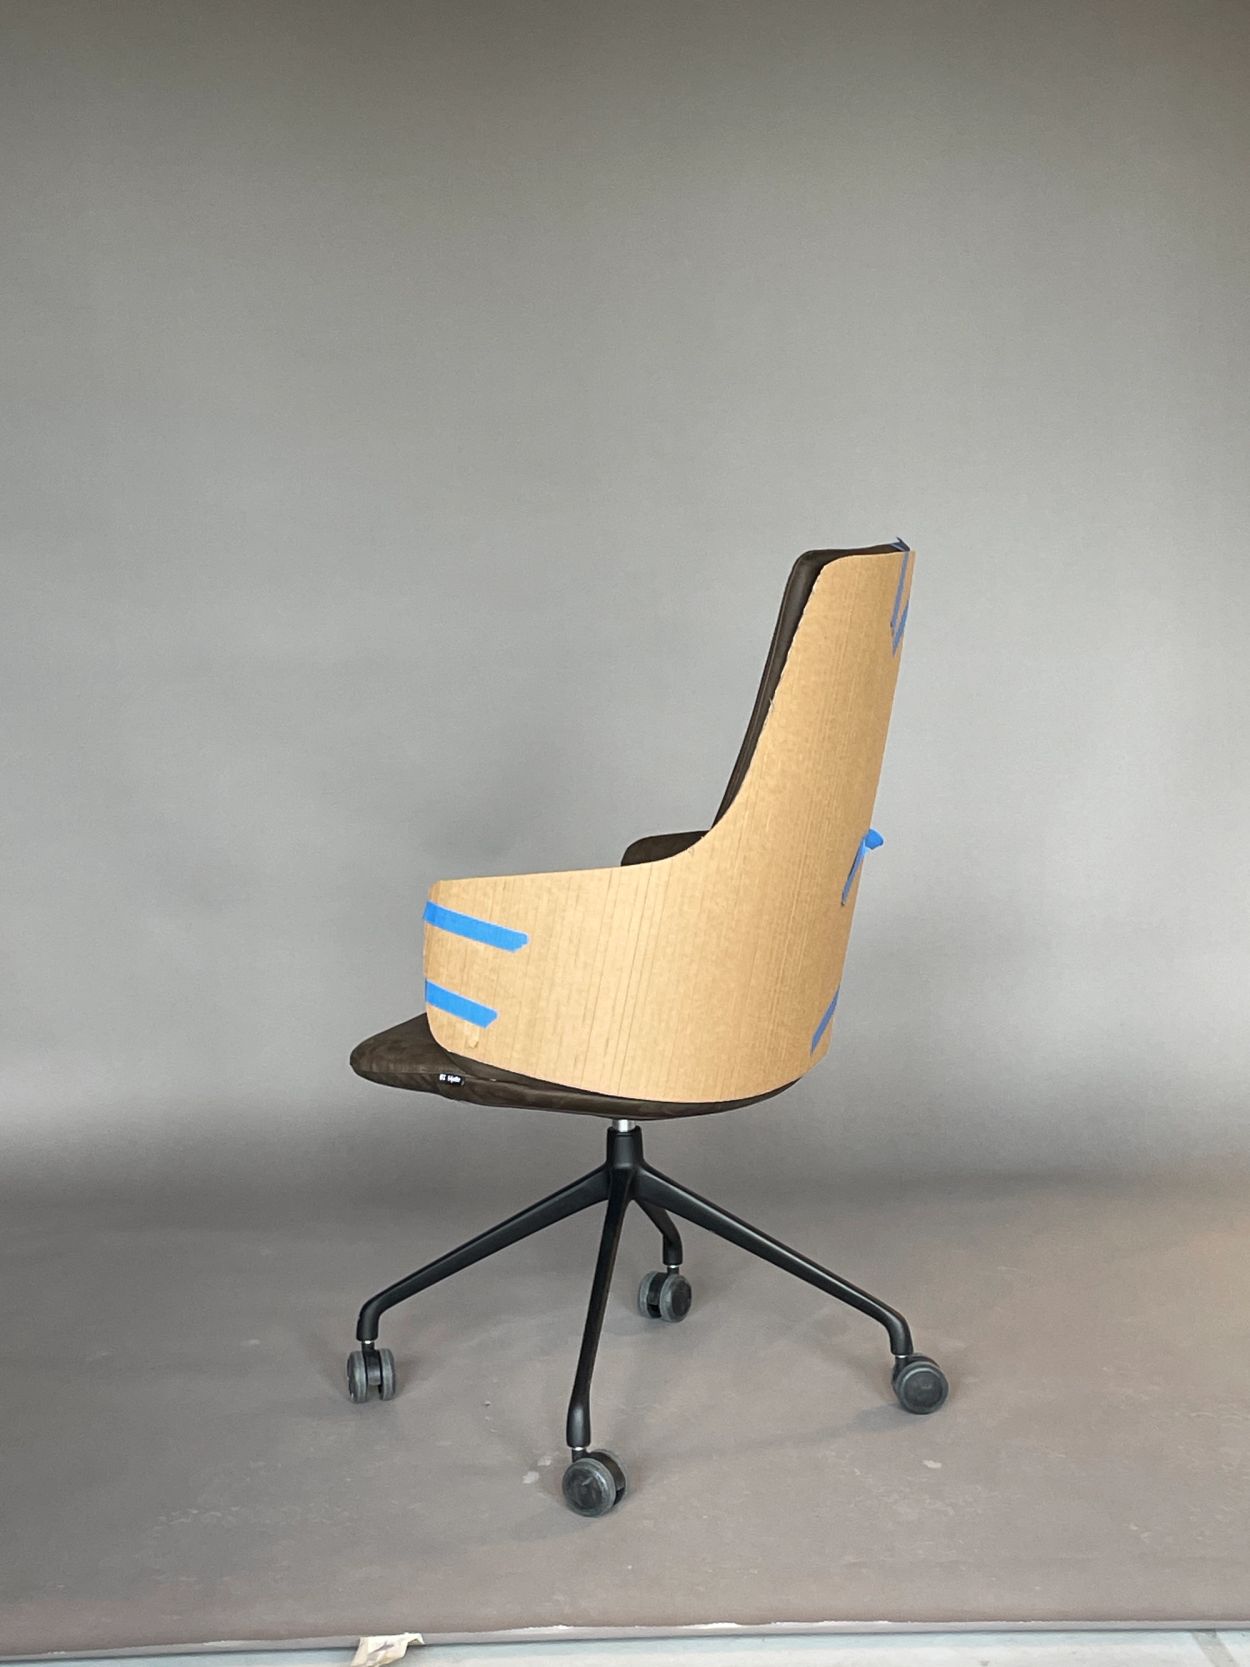 photo of Ada chair with card sheet for testing